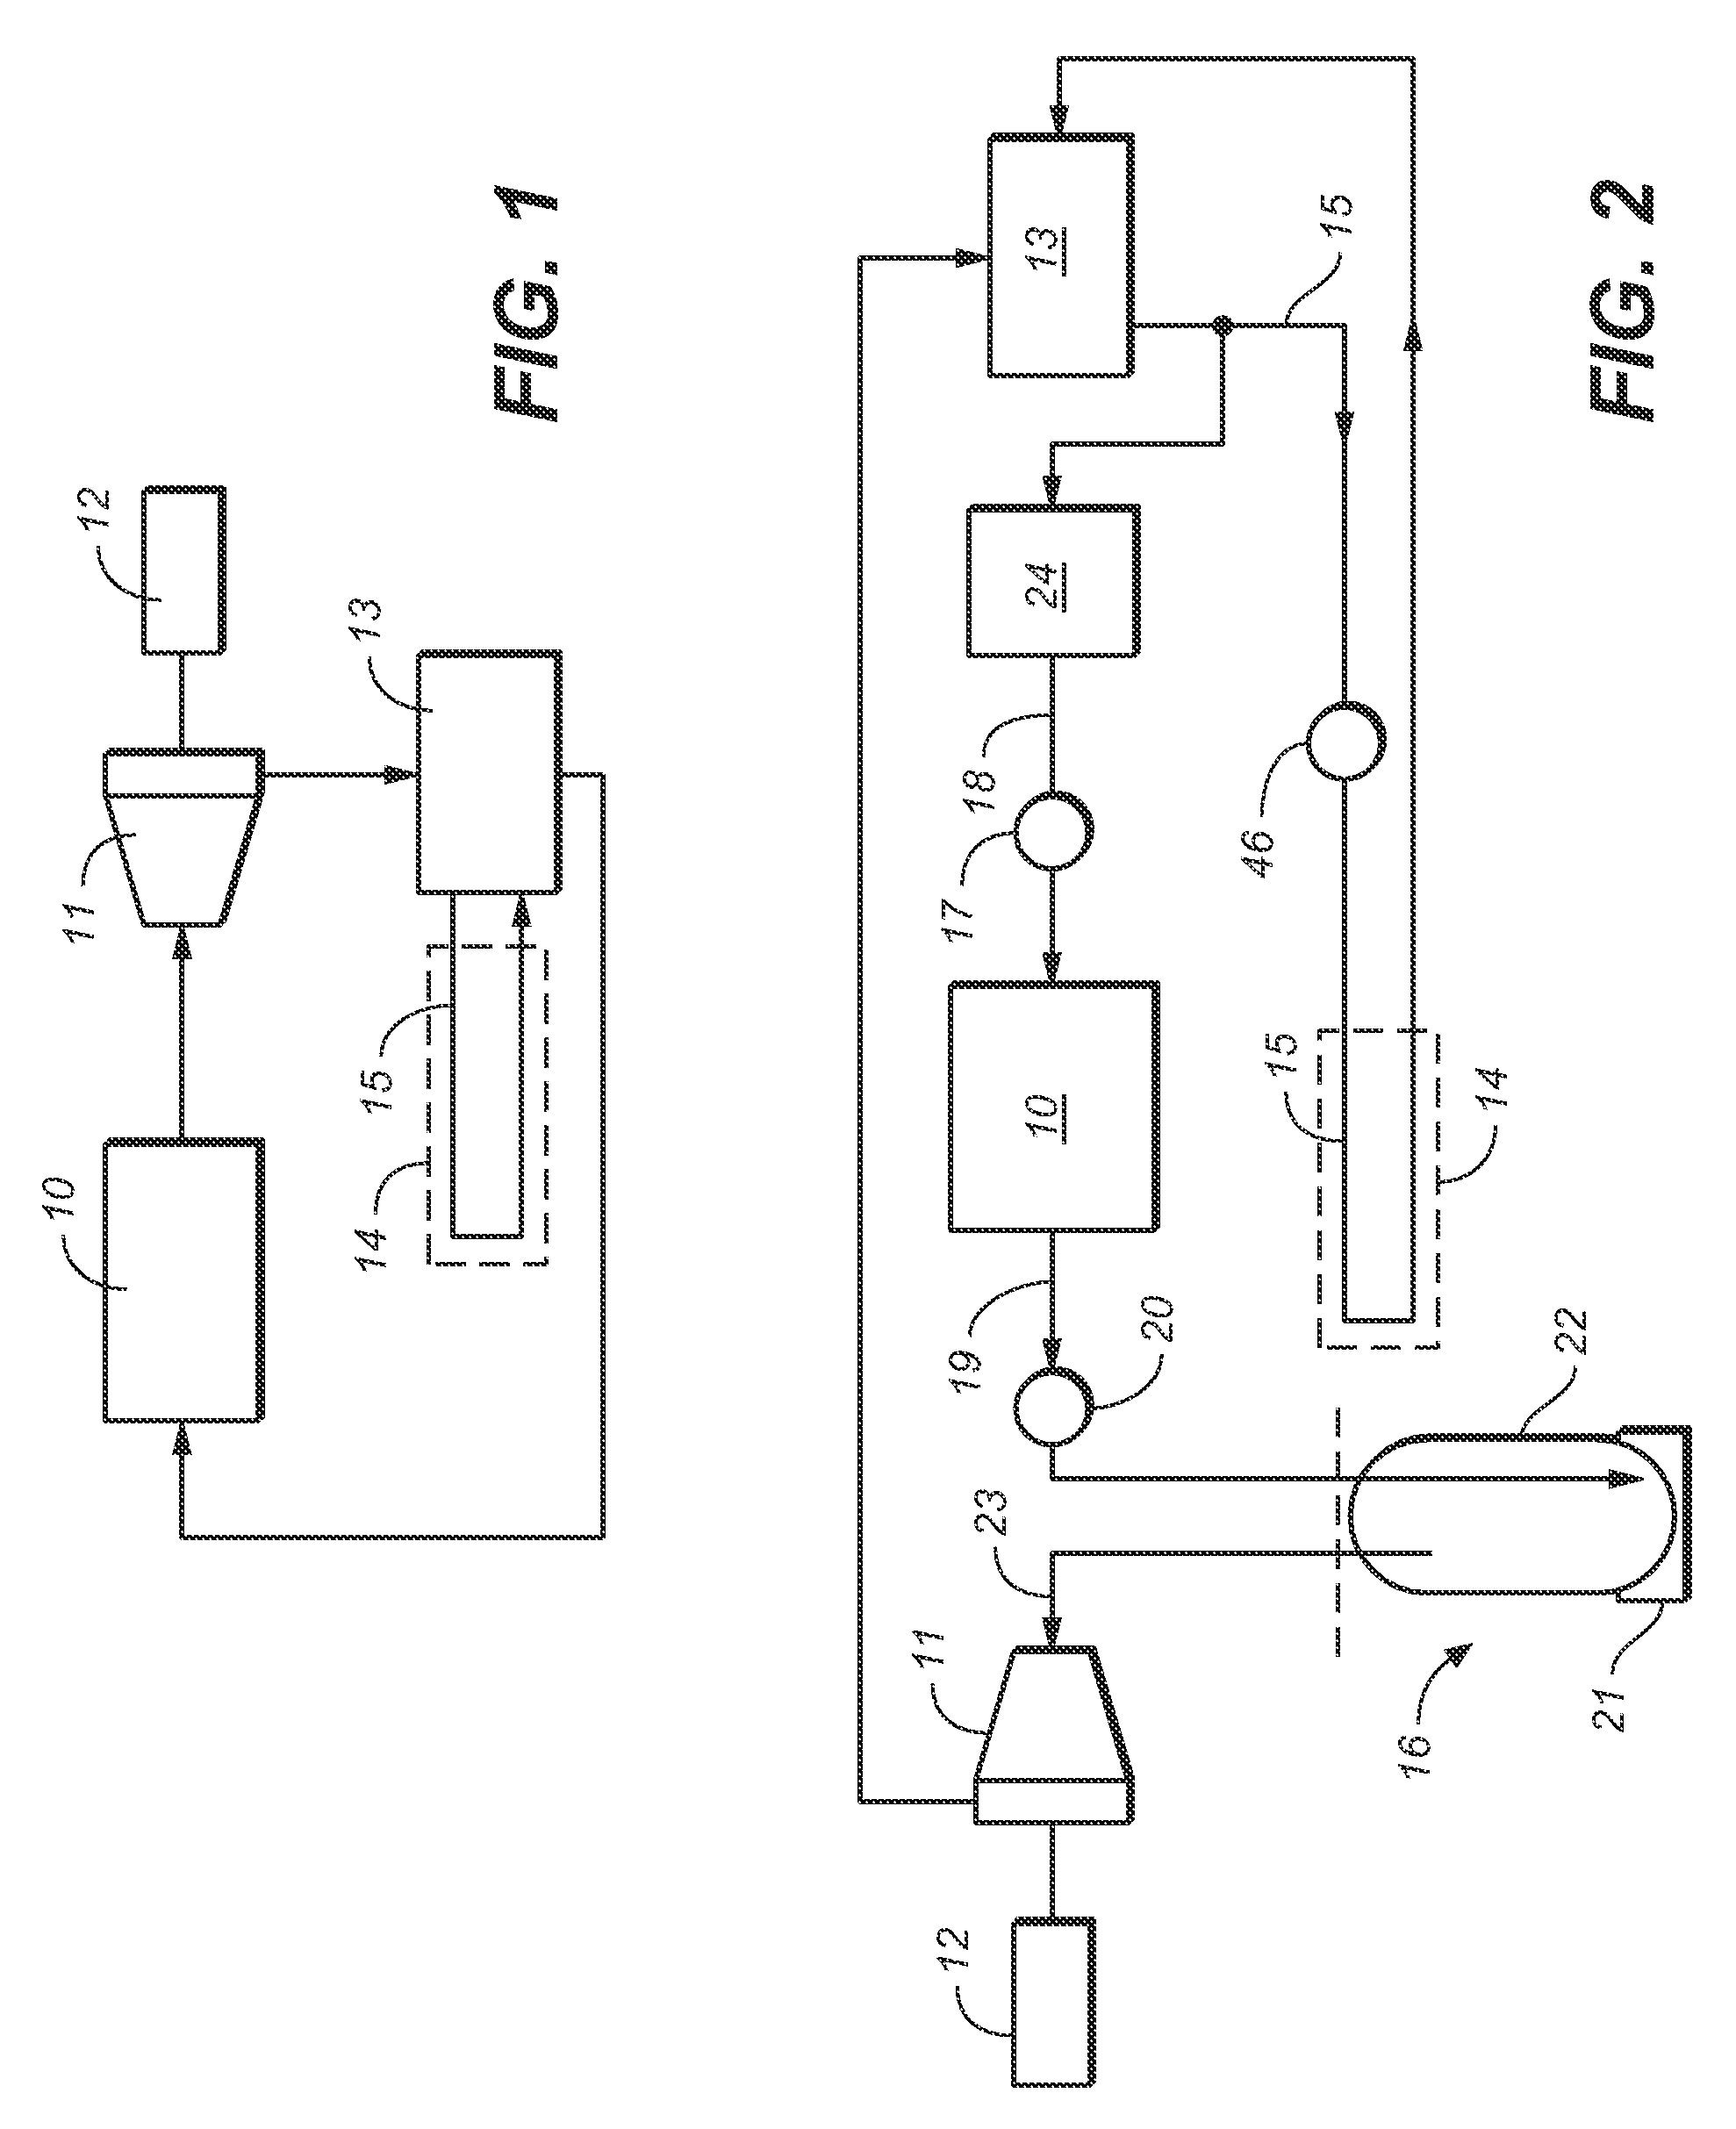 Convective/radiative cooling of condenser coolant